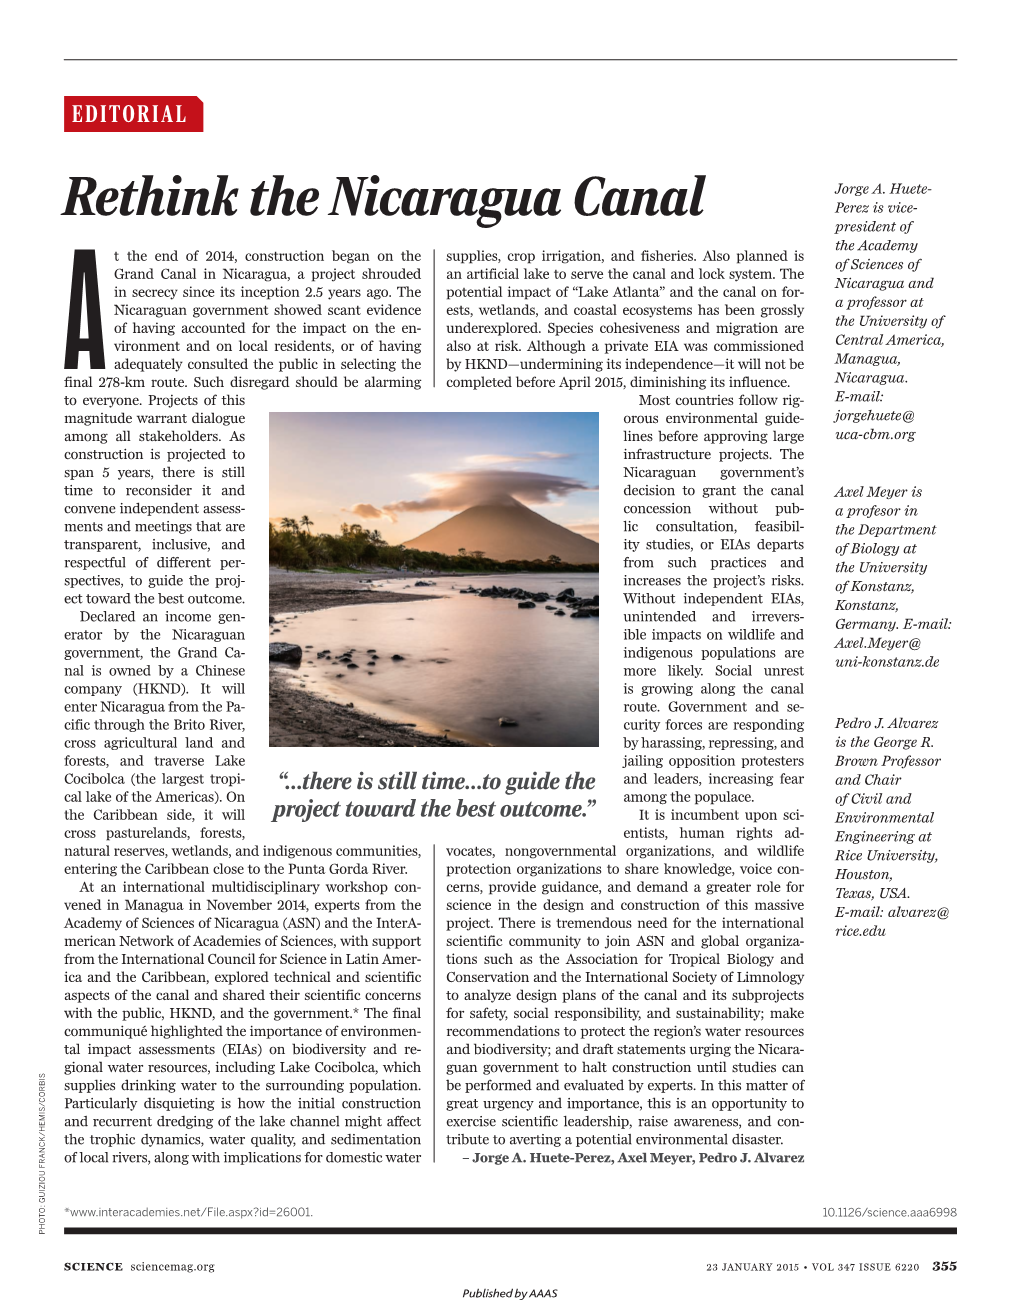 Rethink the Nicaragua Canal Perez Is Vice- President of the Academy T the End of 2014, Construction Began on the Supplies, Crop Irrigation, and Fisheries